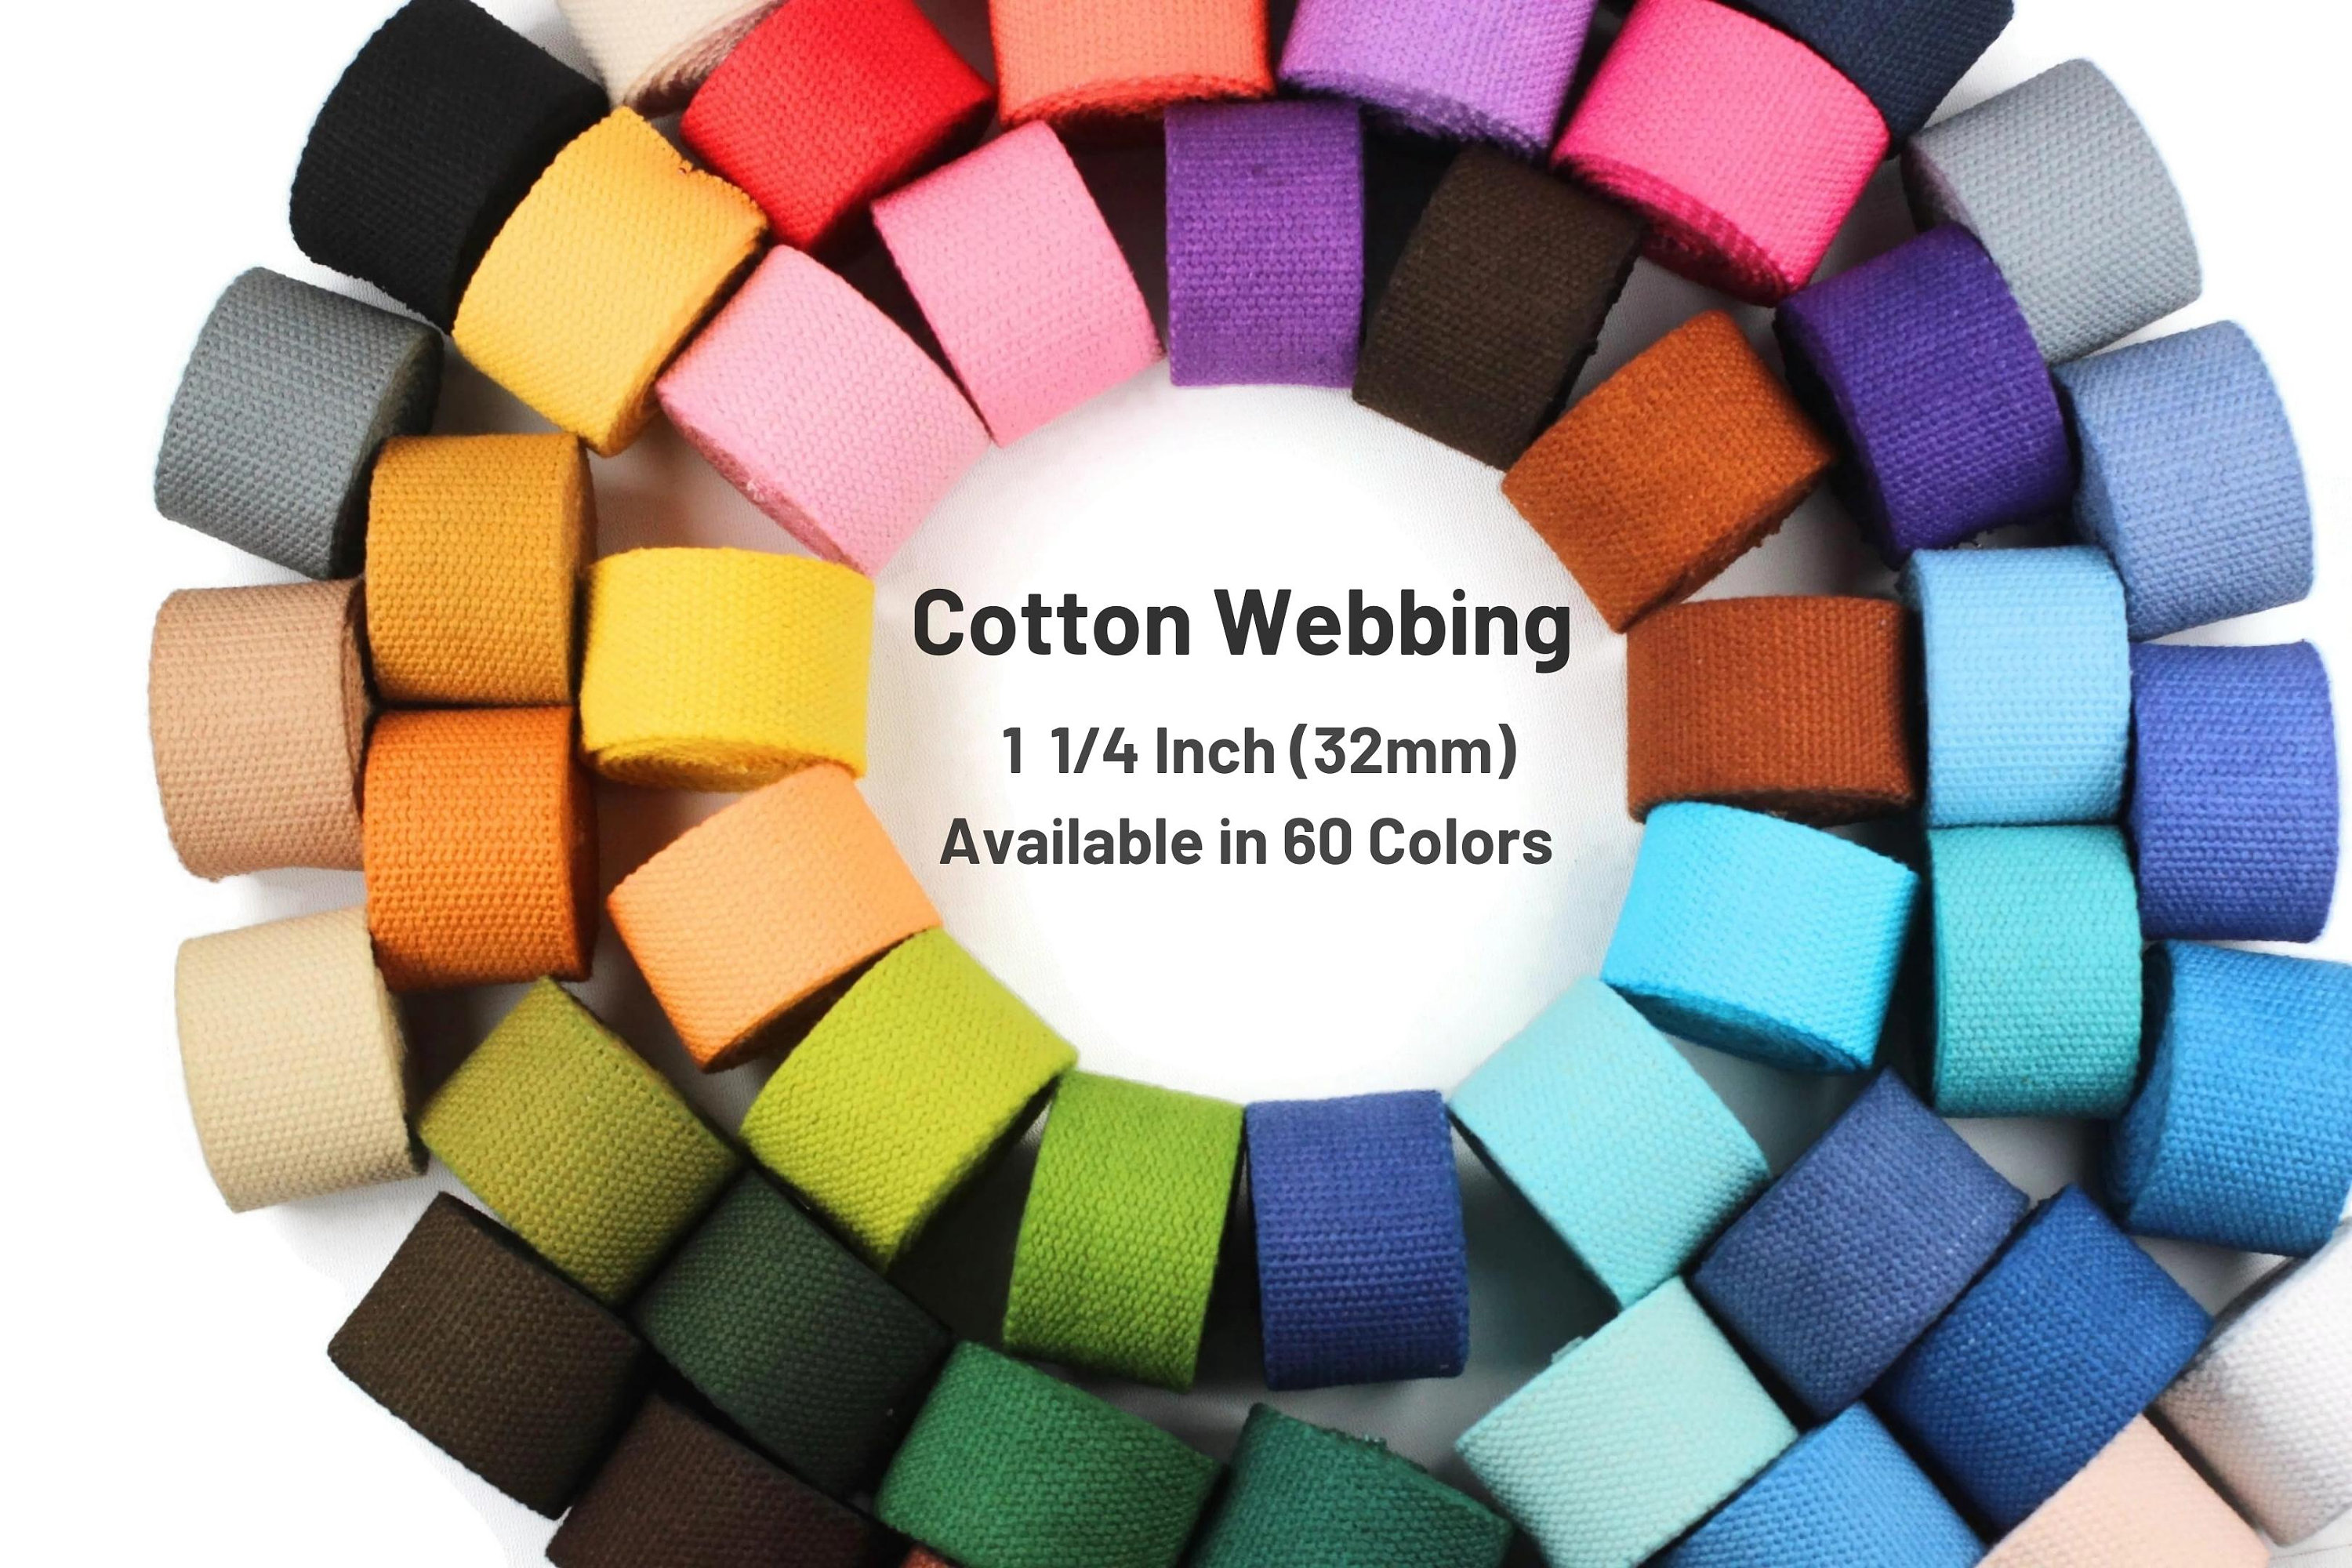 COTOWIN 1.25 Wide Thick Heavy Cotton Webbing，6 Yards (Natural White, 1.25“)